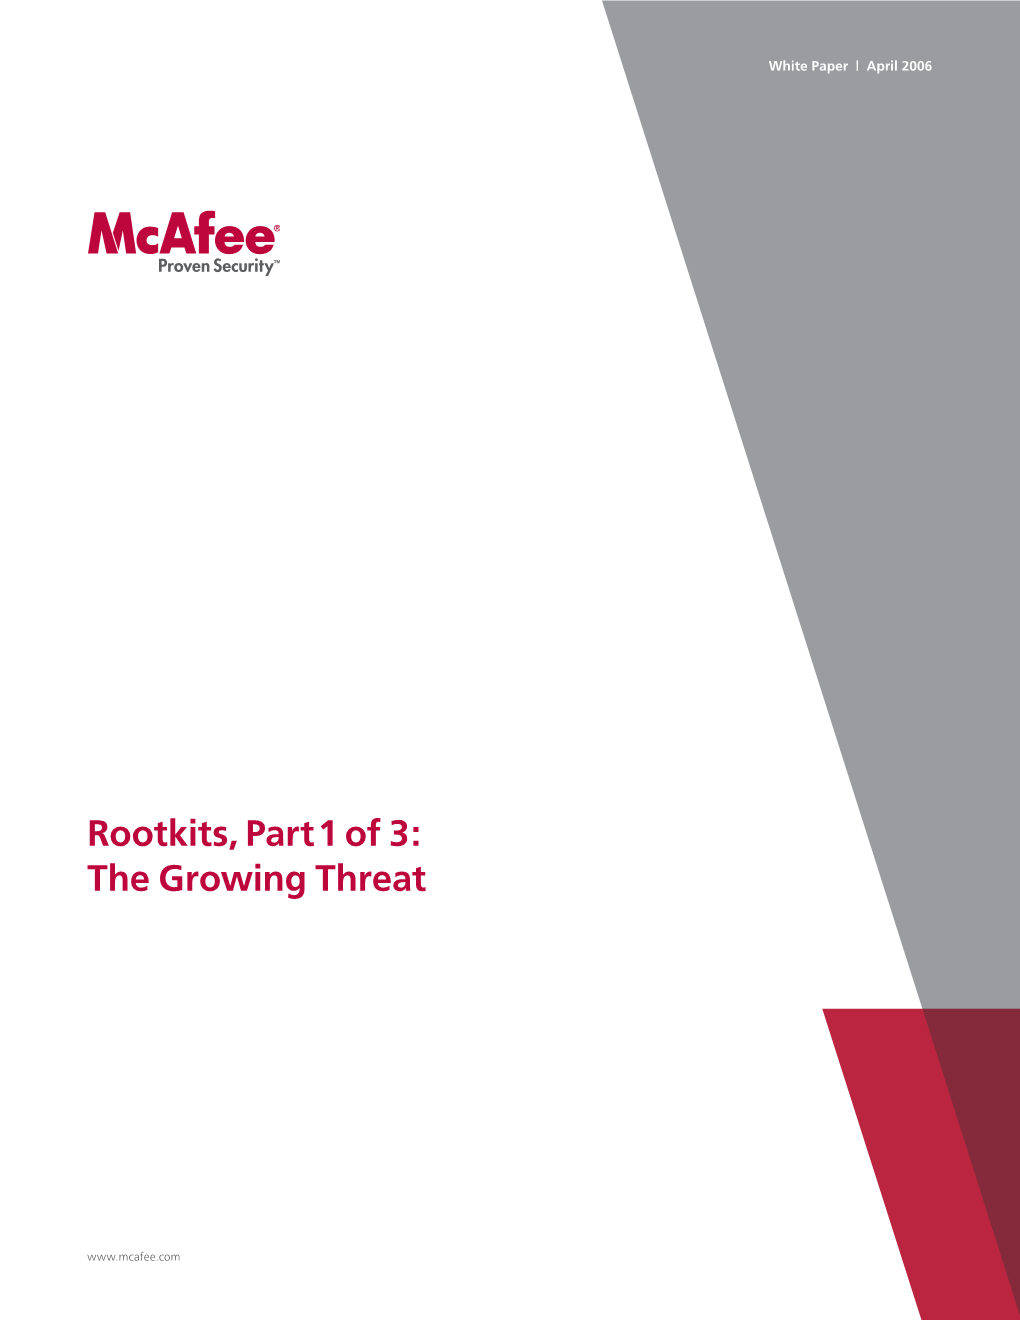 Rootkits, Part 1 of 3: the Growing Threat